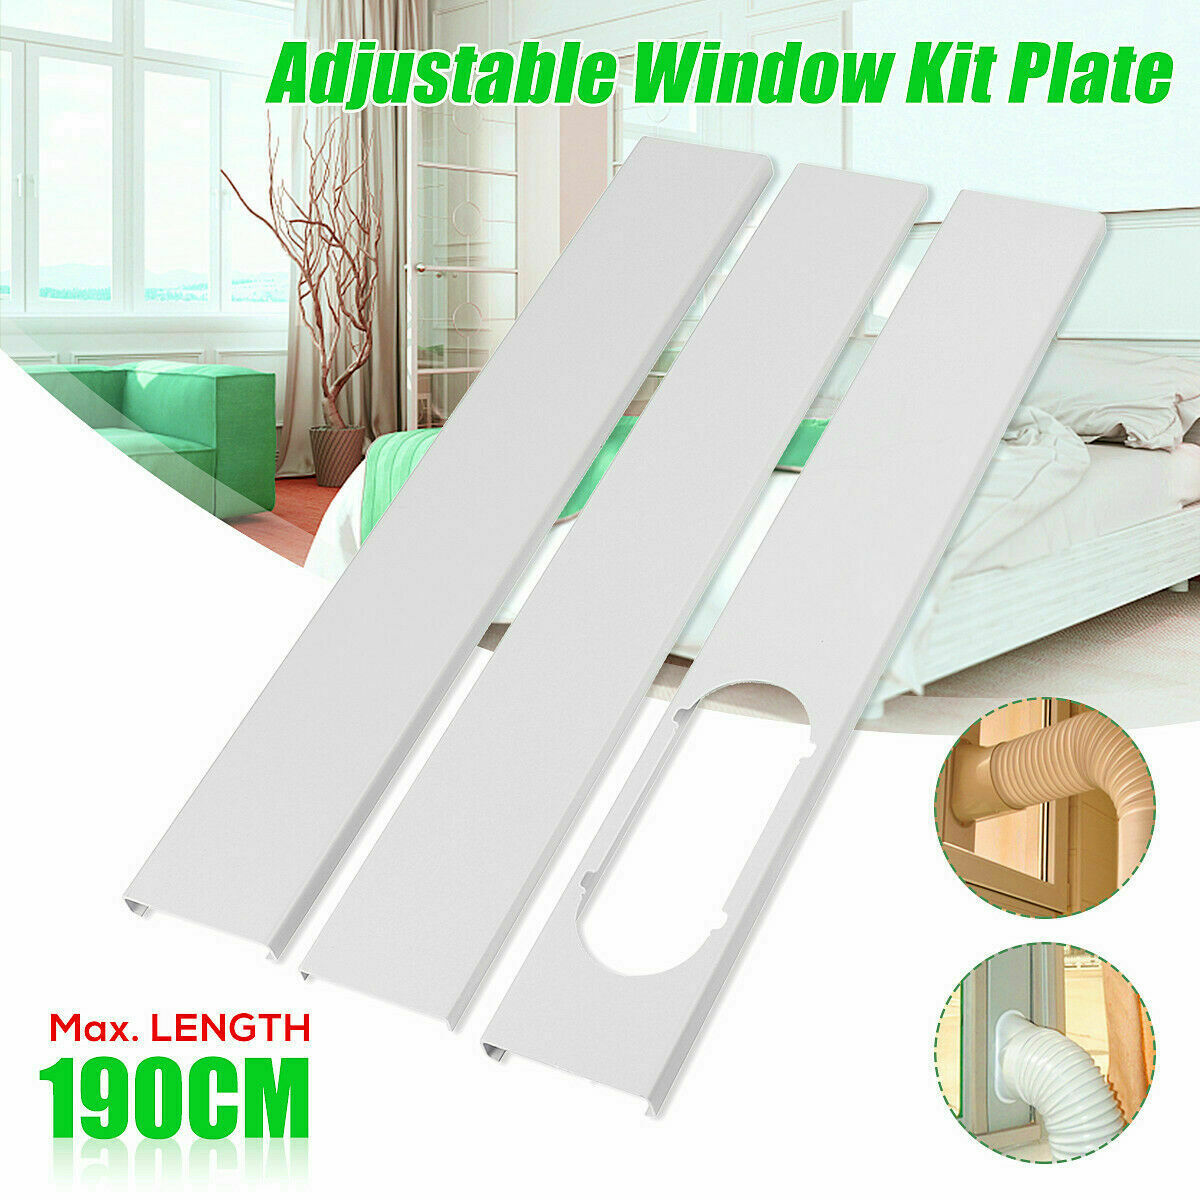 3PCS Adjustable 190CM Window Slide Kit Plate For Portable Air Conditioner new